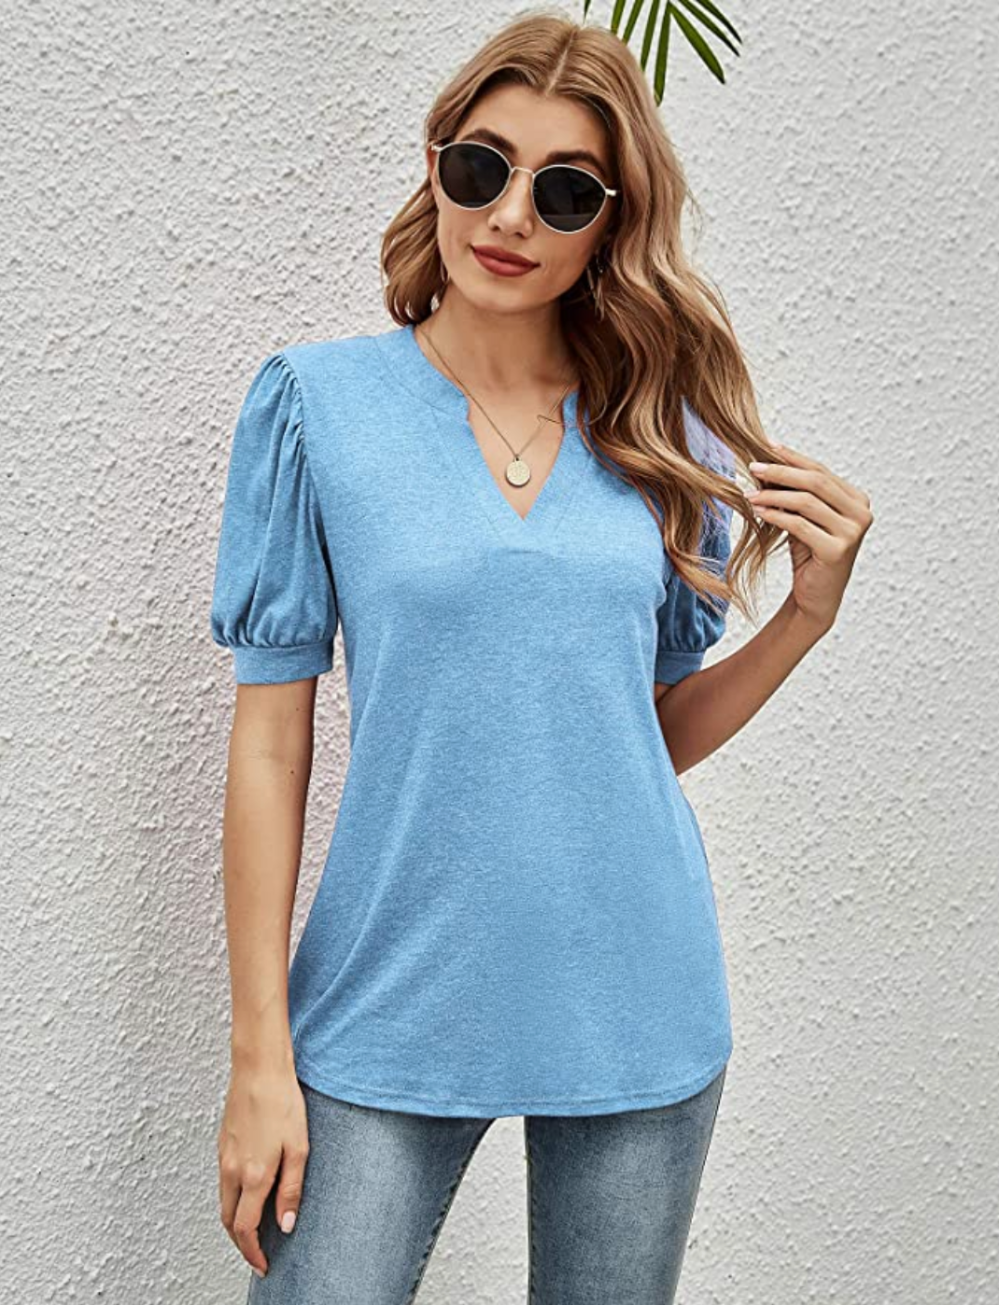 Romanstii Blouse Is the Ultimate Spring Top on Amazon | Us Weekly